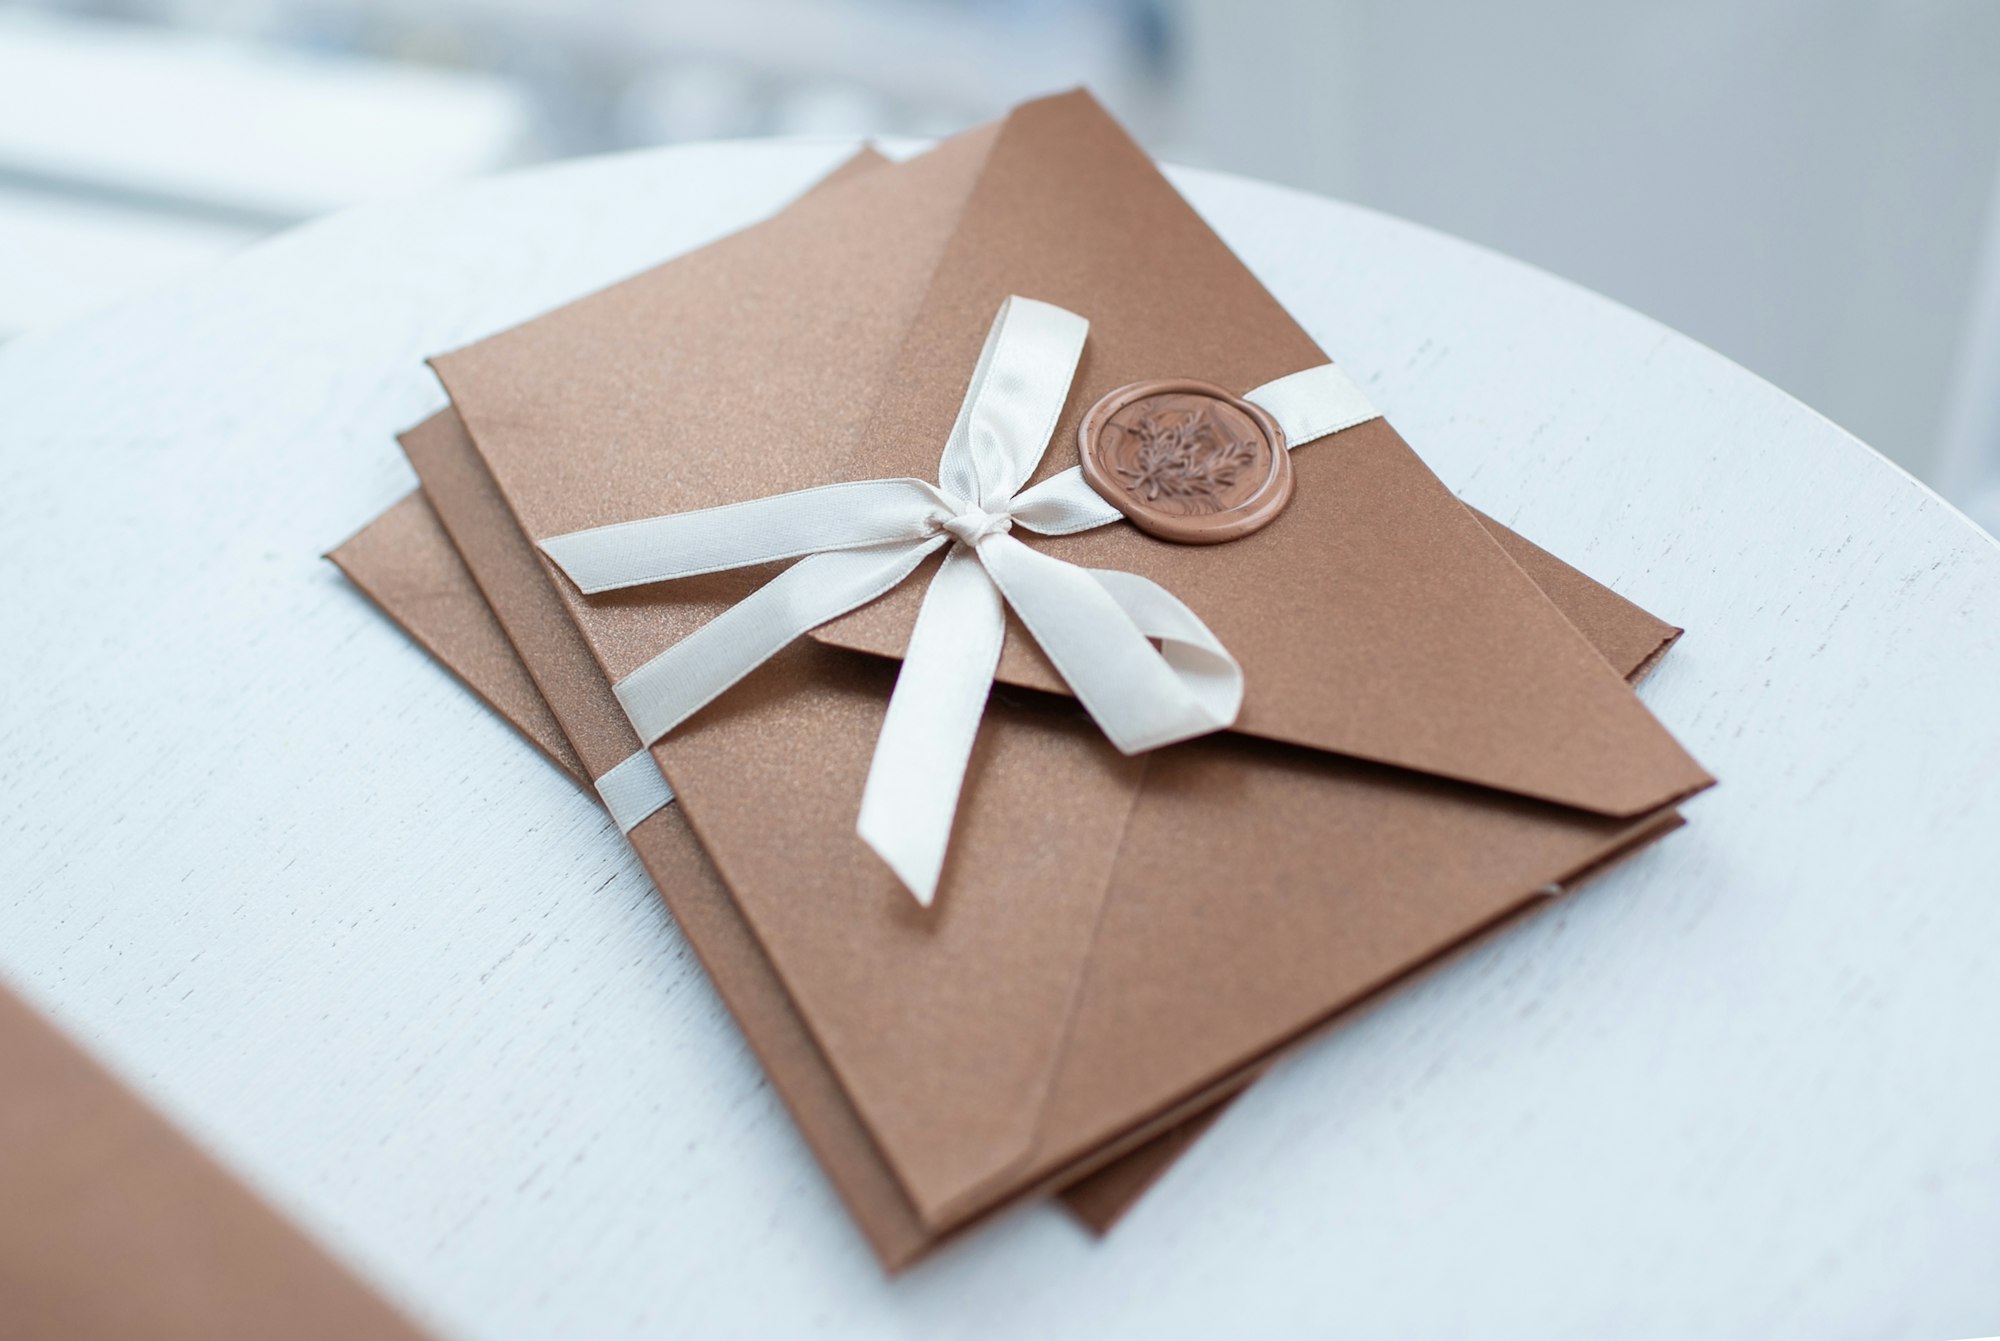 Gift Certificate, gift voucher or discount. closeup bronze invitation envelopes on white table